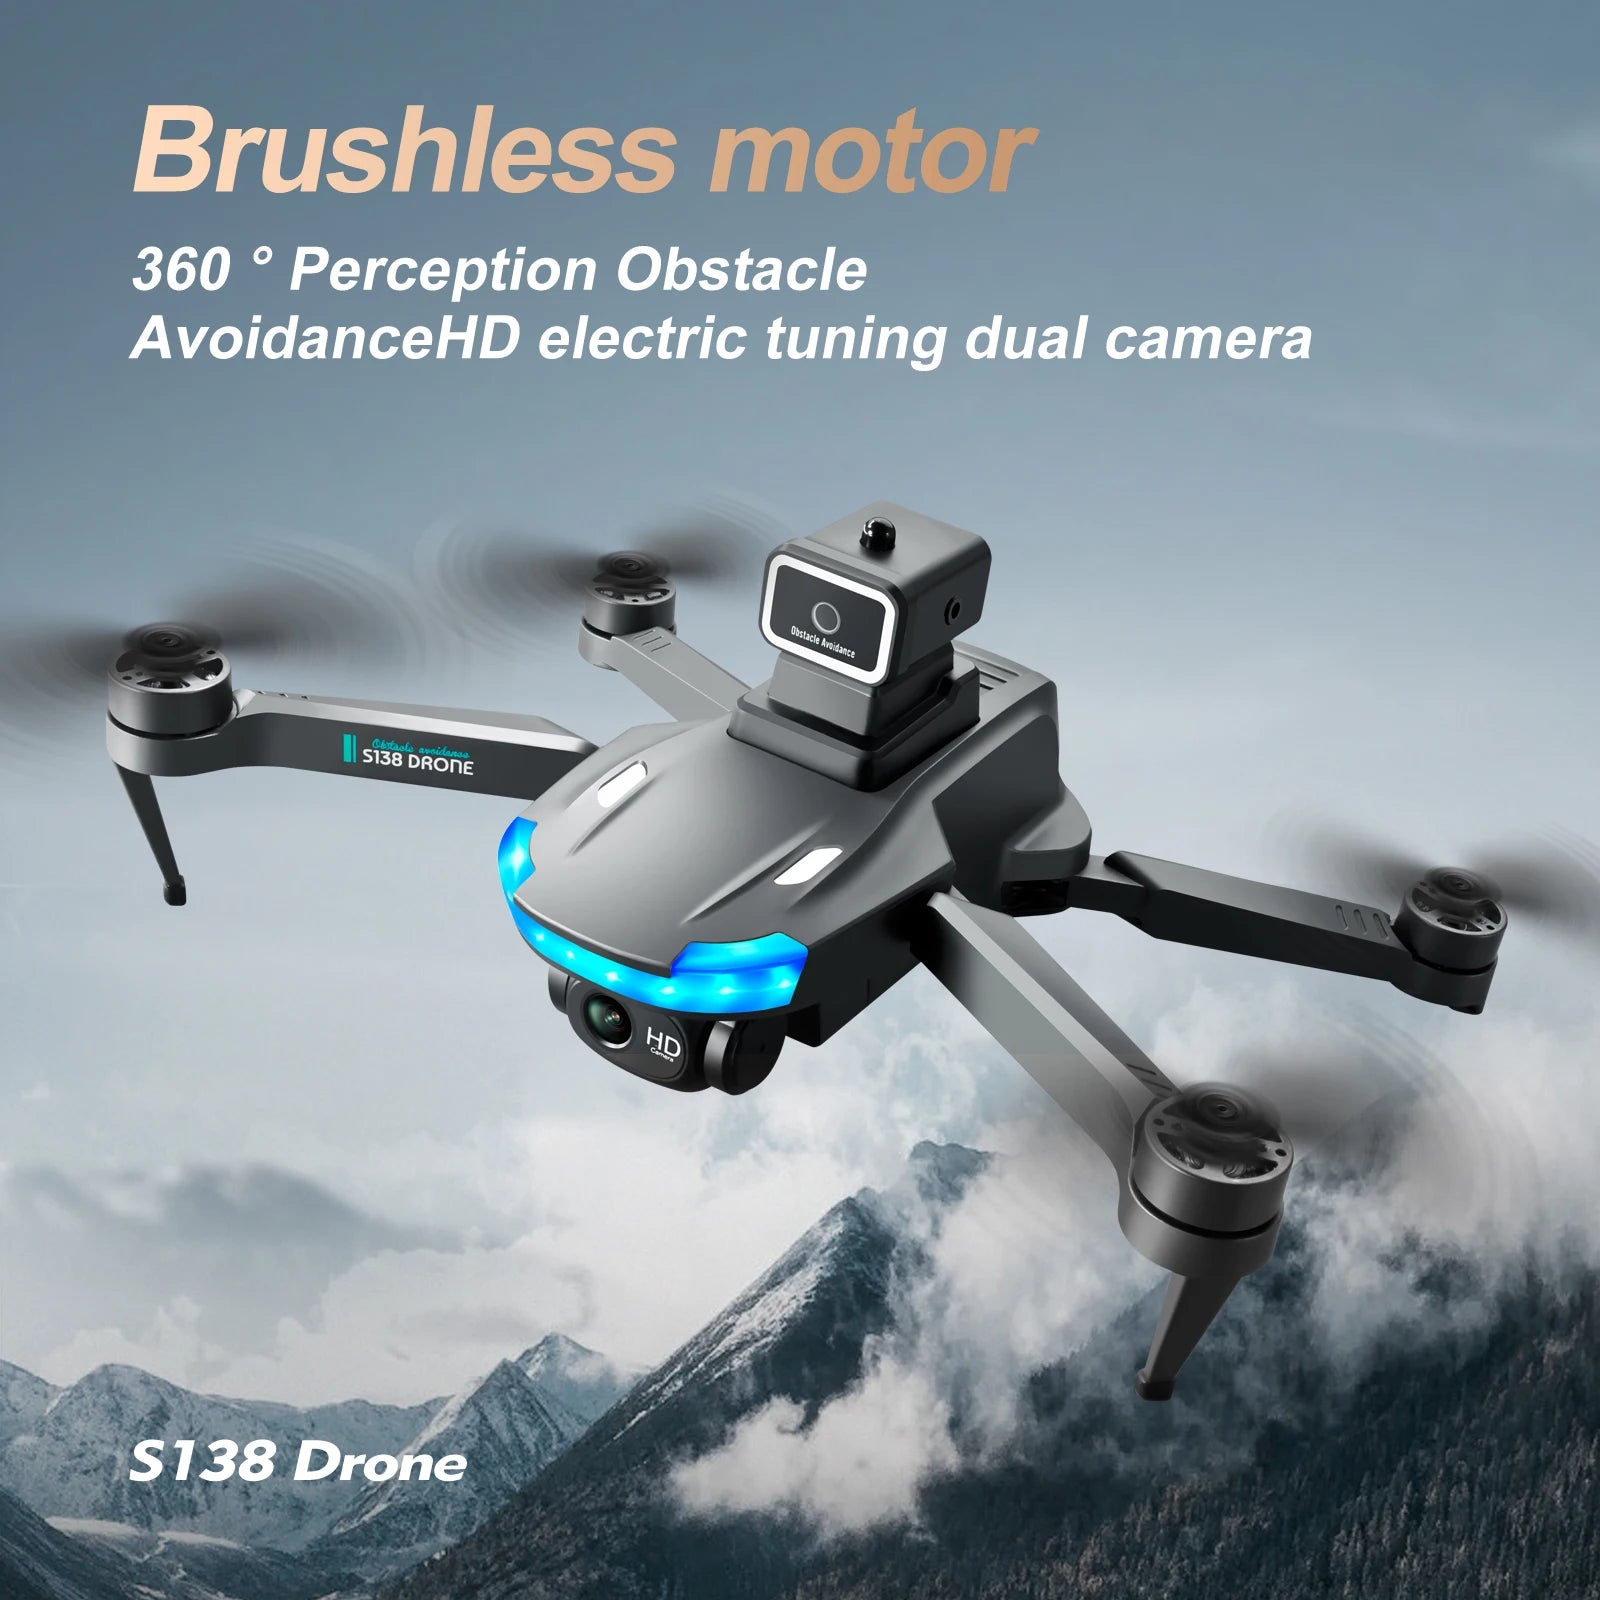 S138 Drone, brushless motor 360 perception obstacle avoidancehd electric tuning dual camera